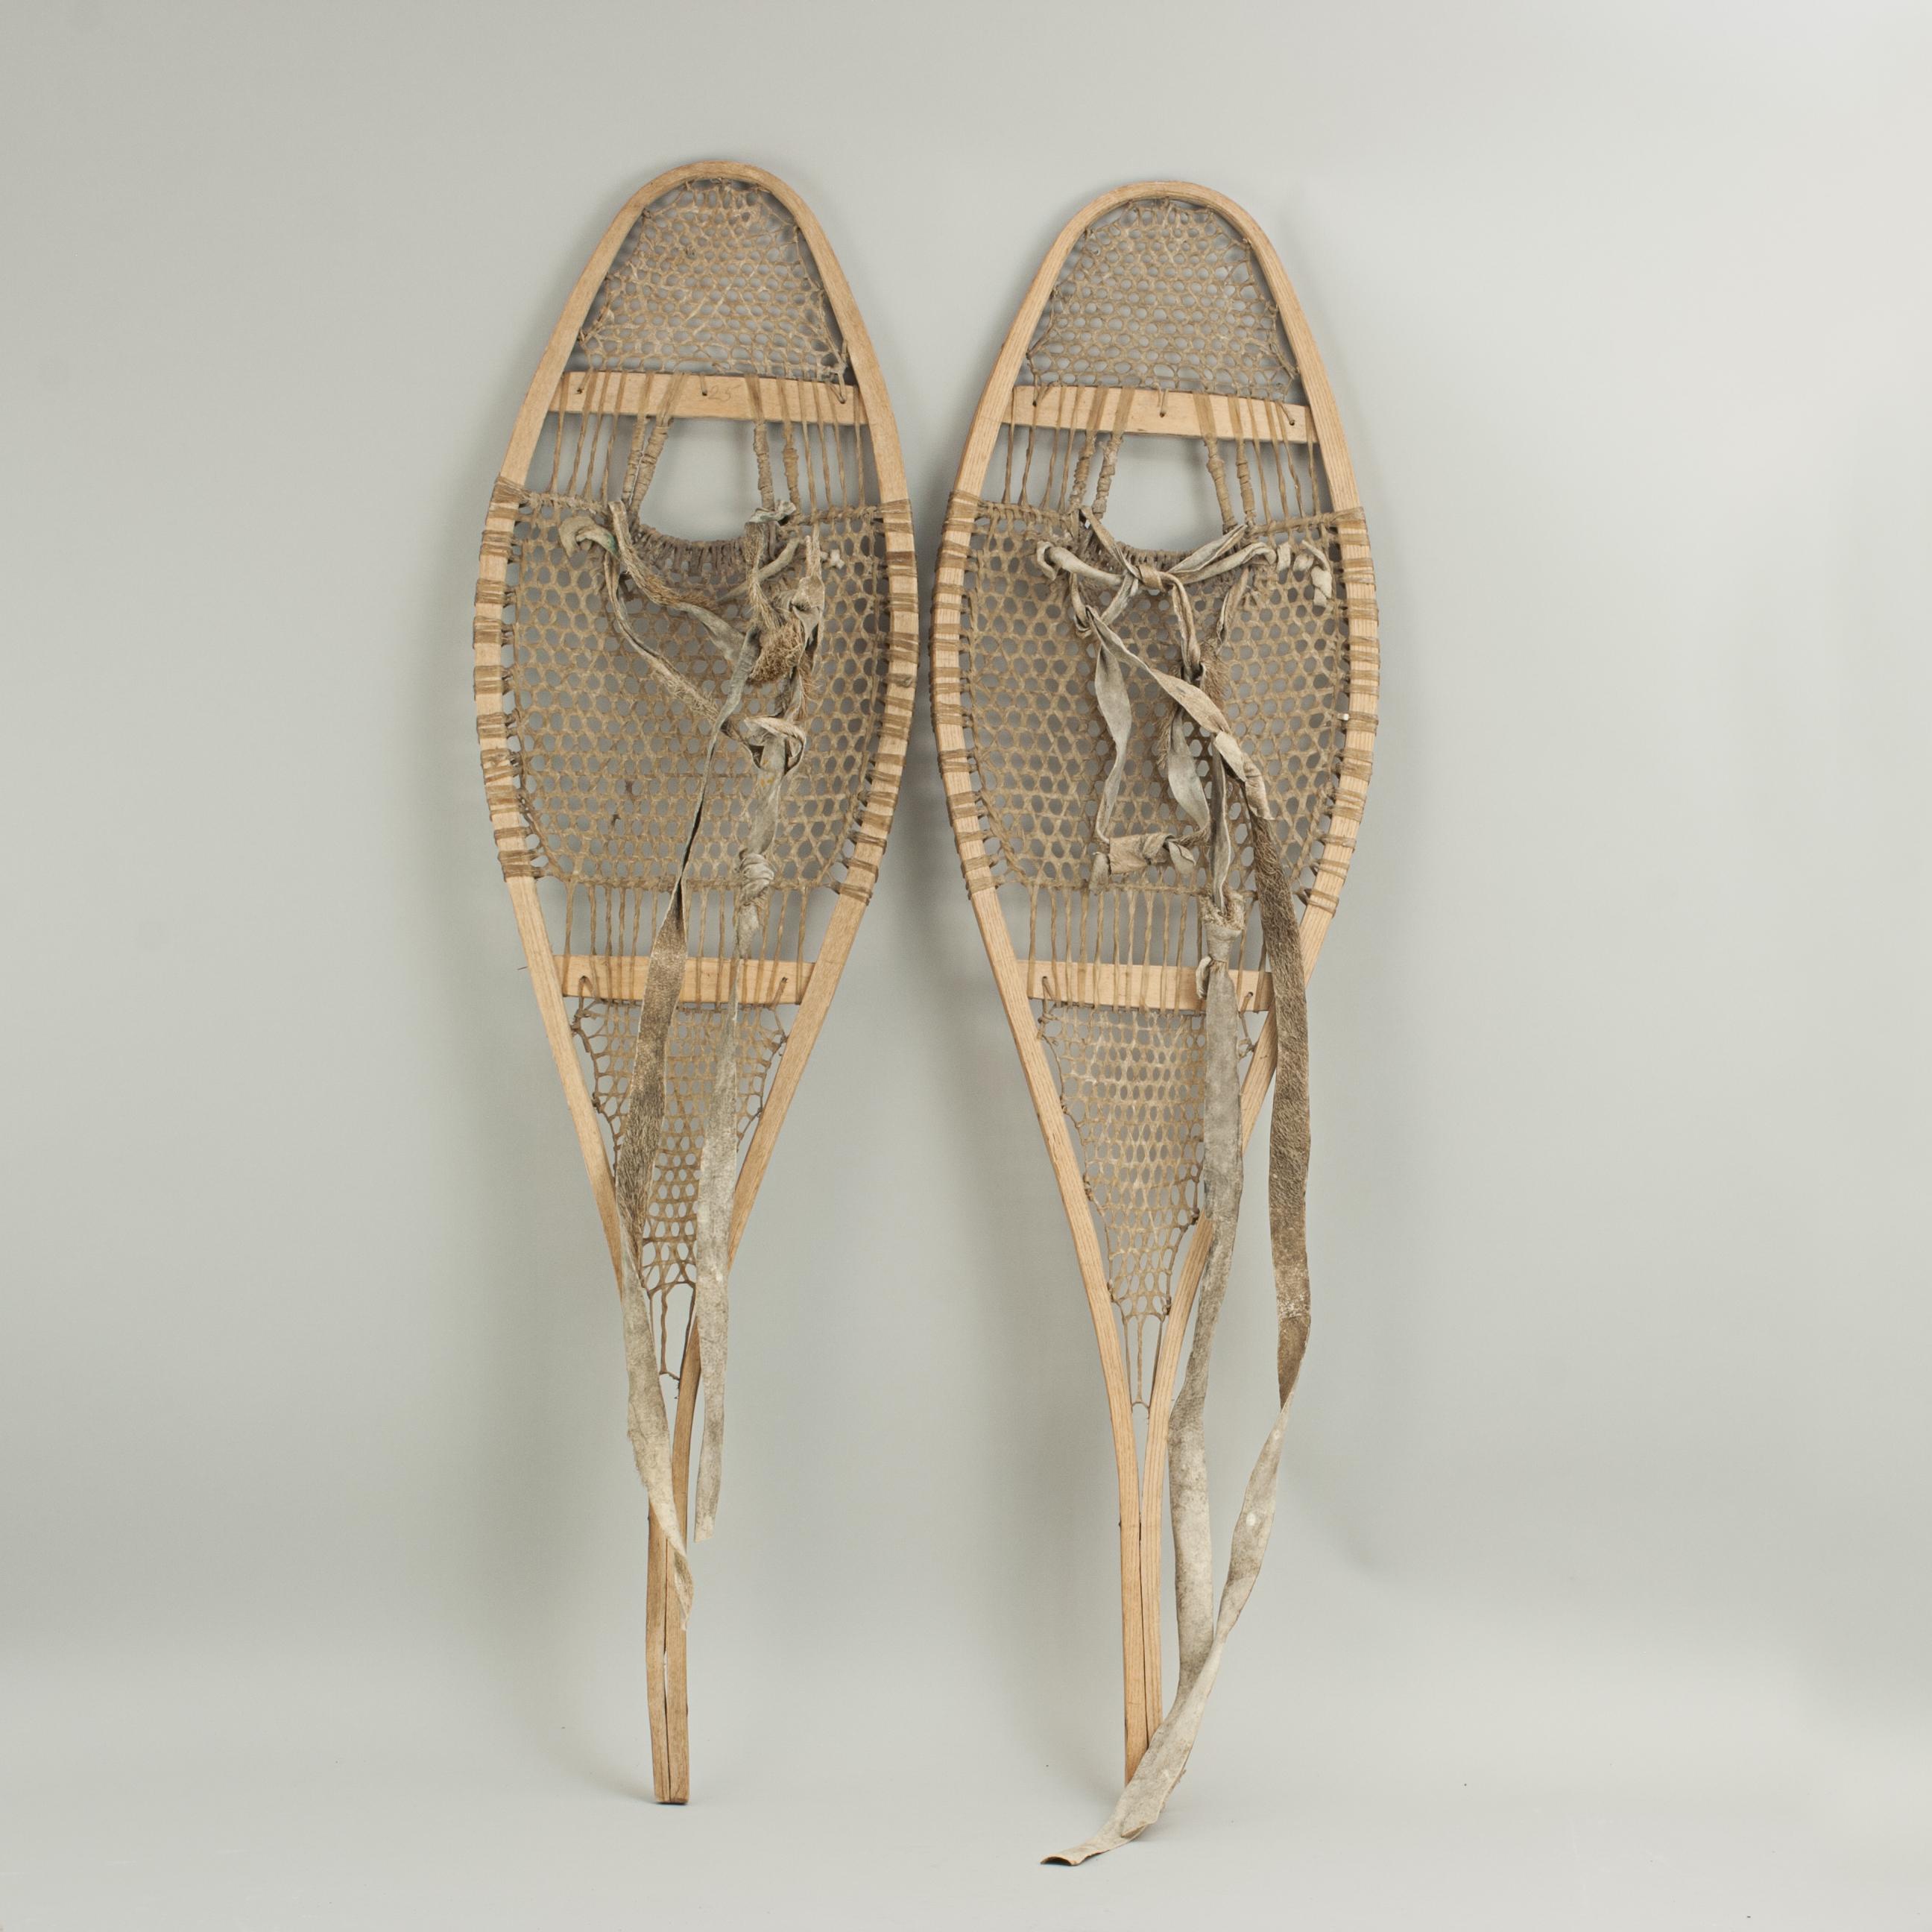 20th Century Vintage North American Wooden Snowshoes